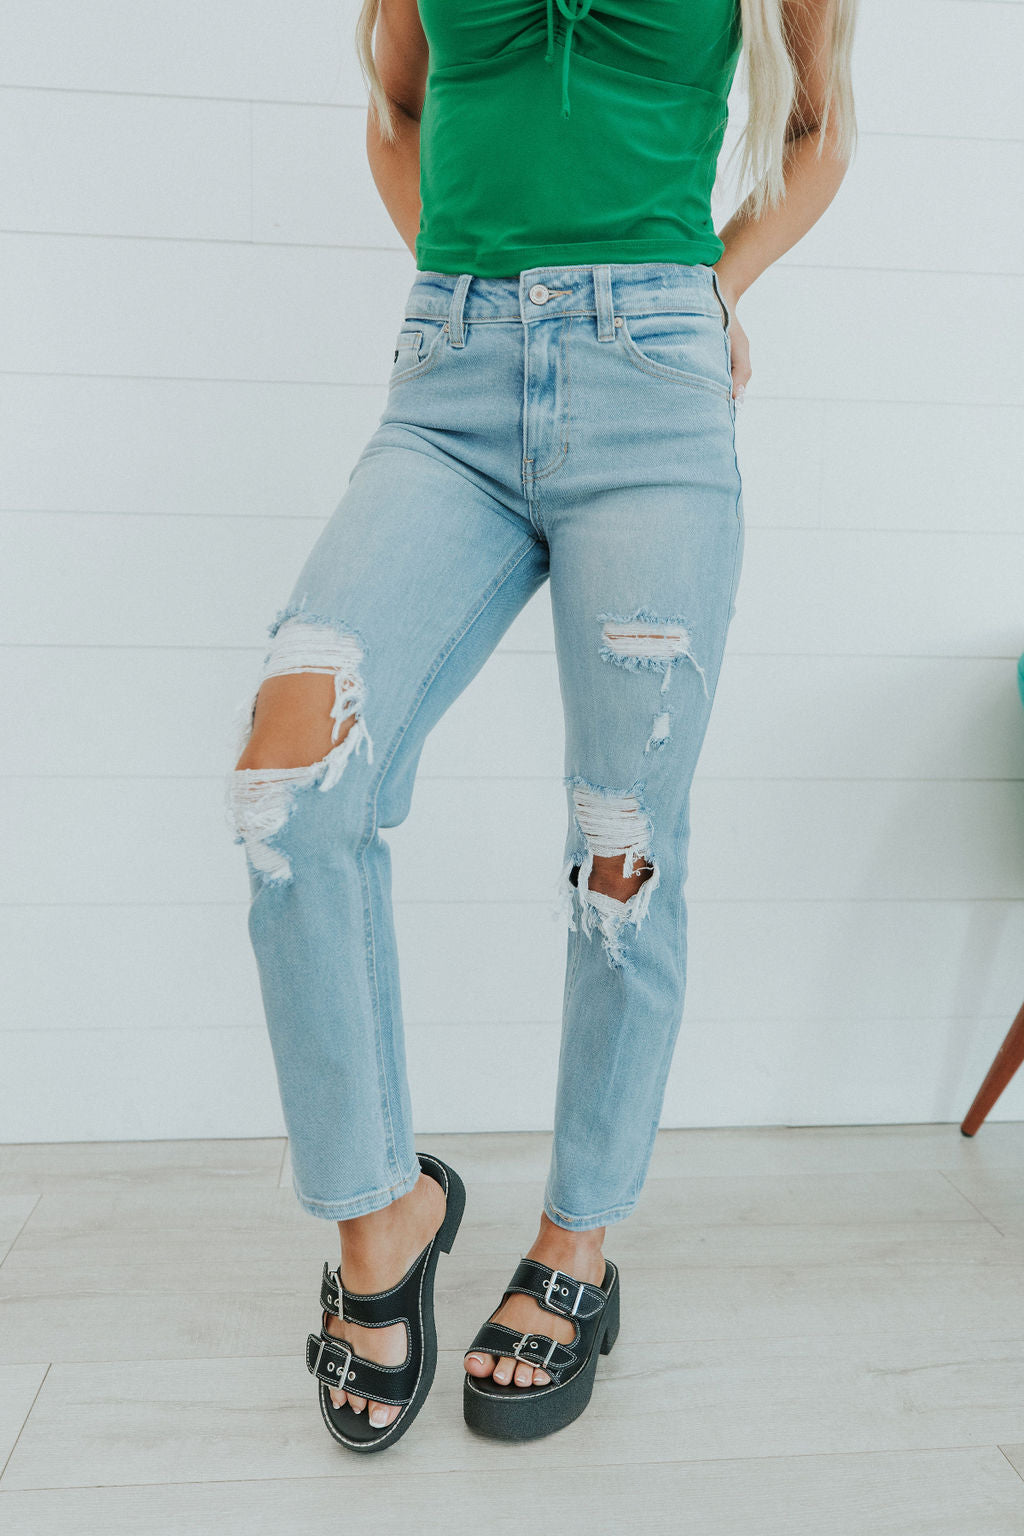 Can't Resist Straight Leg Jeans